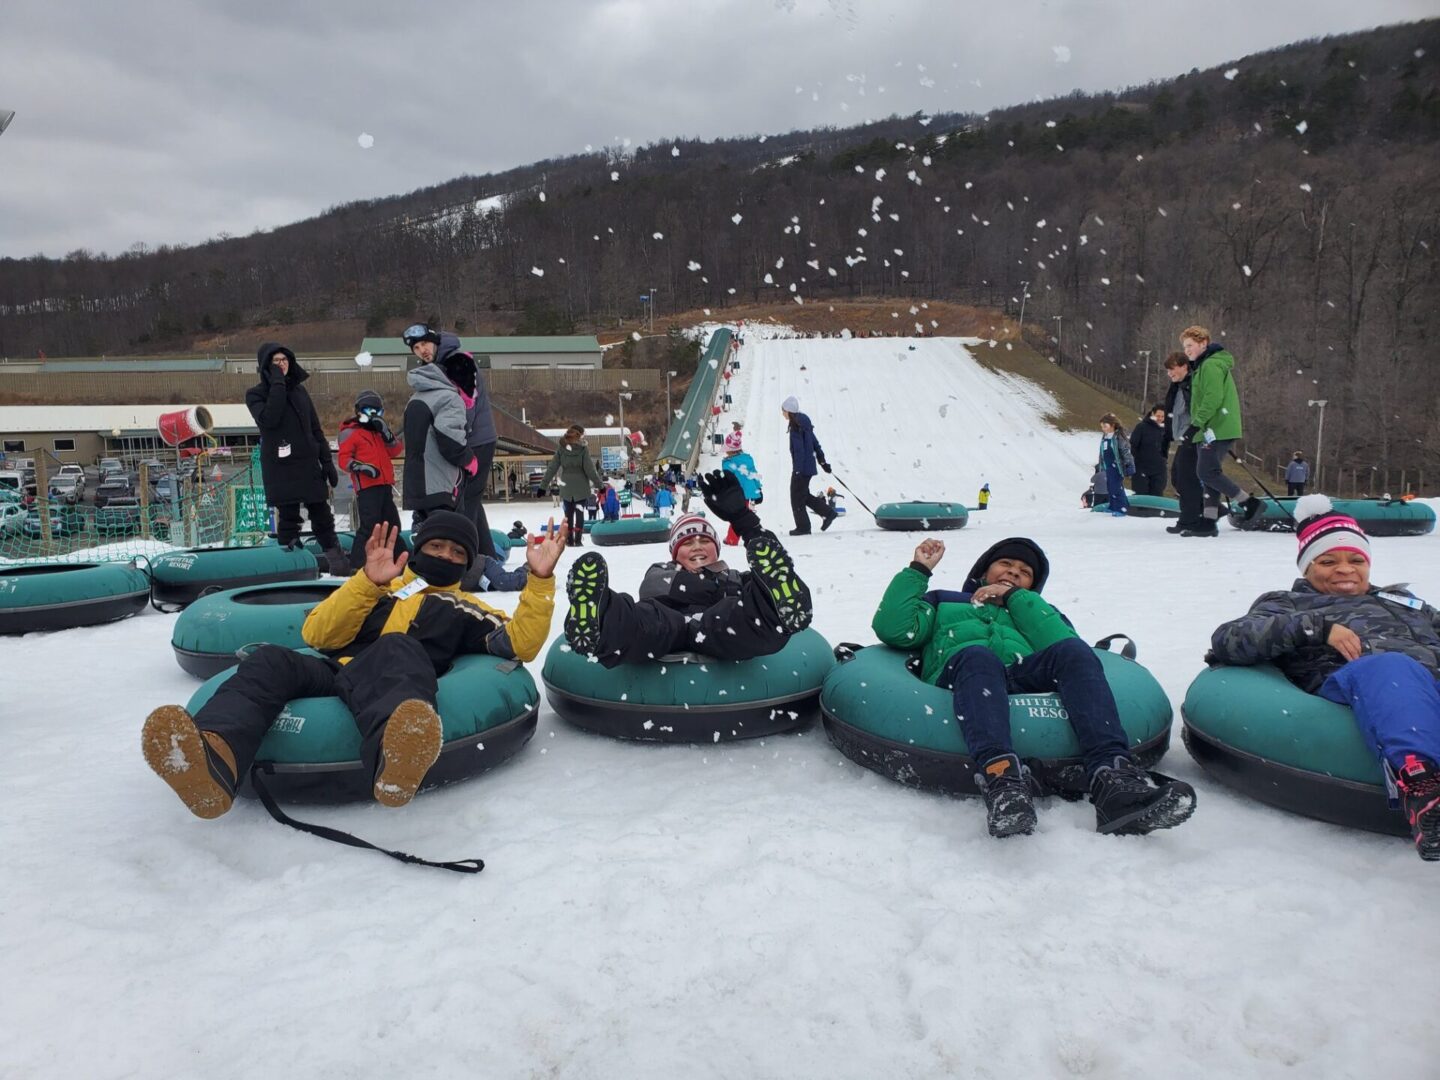 A group of people on tubes participating in the P.L.E.D.G.E. Leadership Program on a snowy slope.